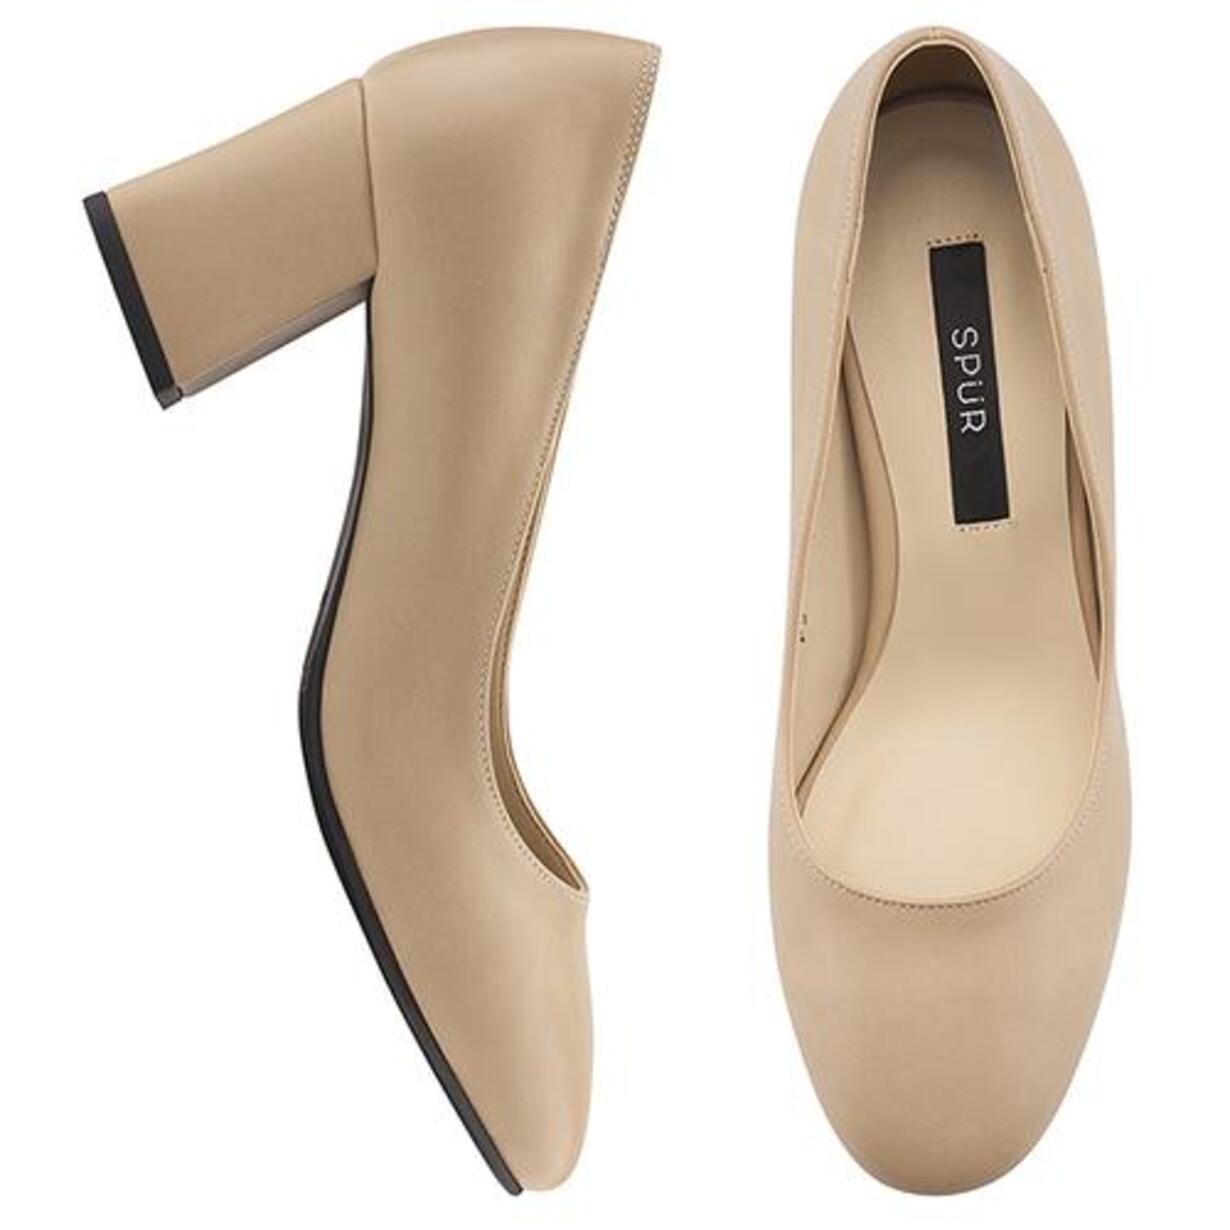 SPUR[스퍼]PS7034 Basic round Pumps 베이지